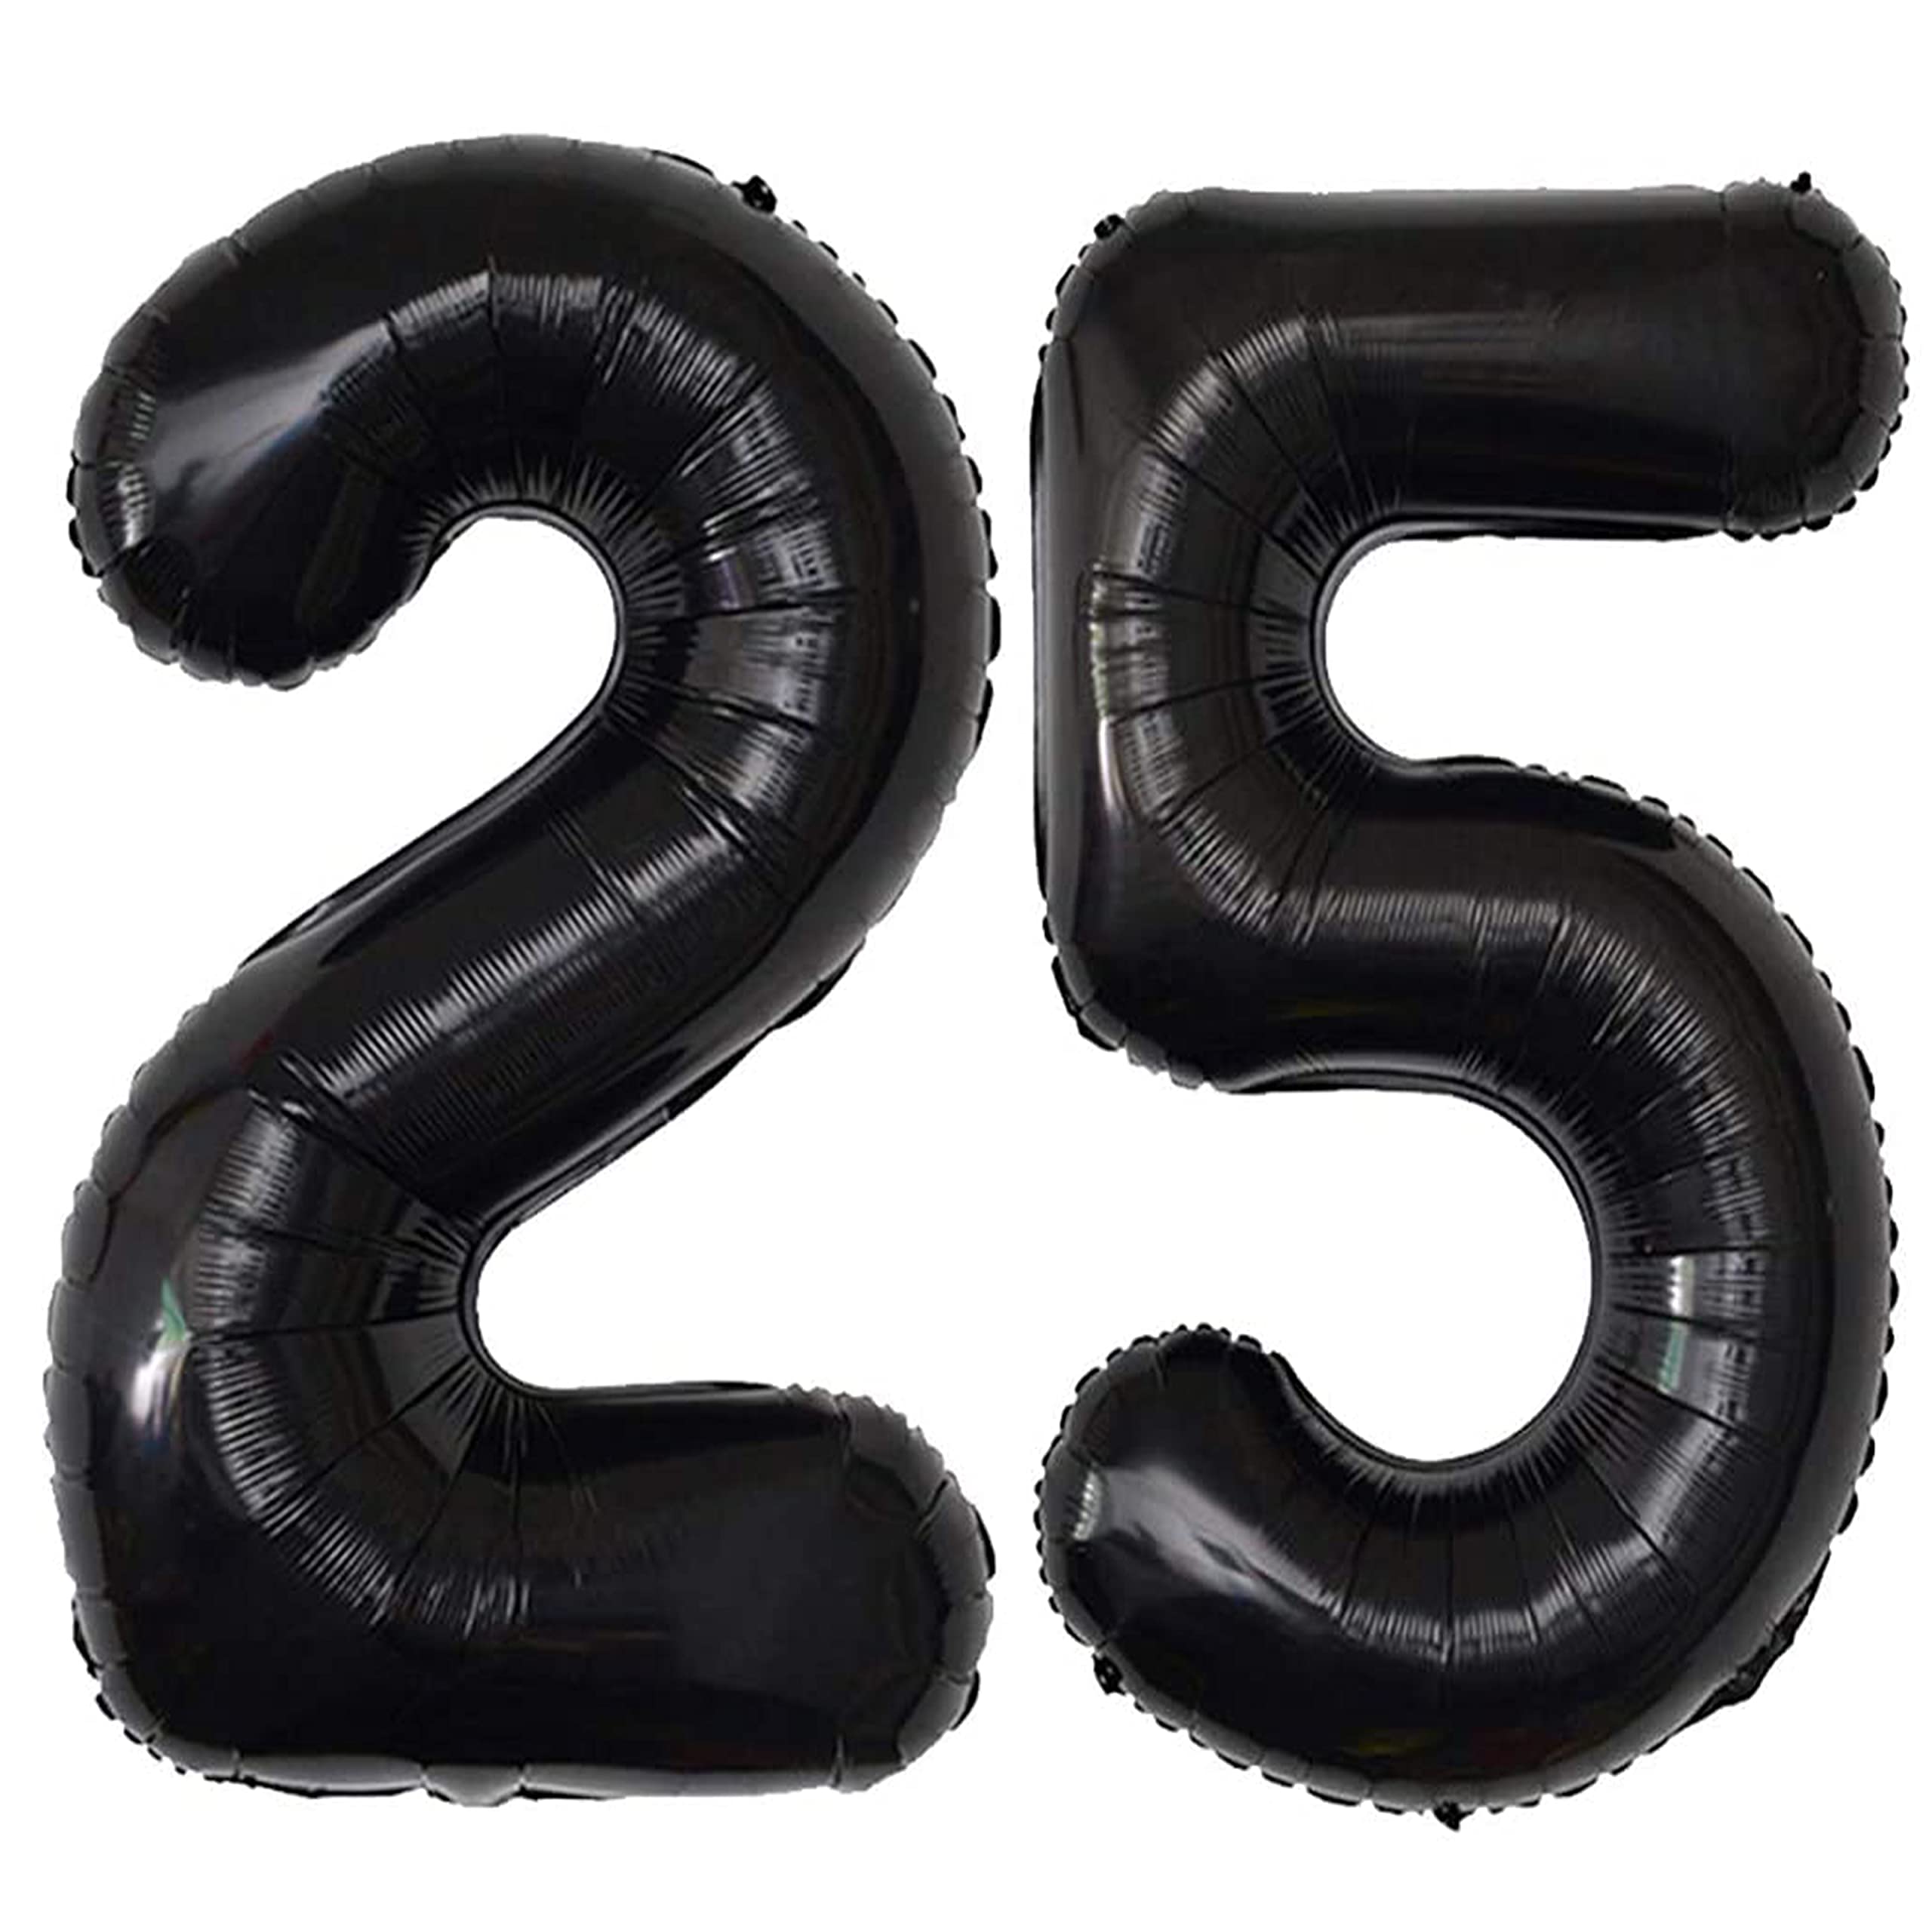 25 Number Balloons Black Big Giant Jumbo Number 25 Foil Mylar Balloons for 25th Birthday Party Supplies 25 Anniversary Events Decorations